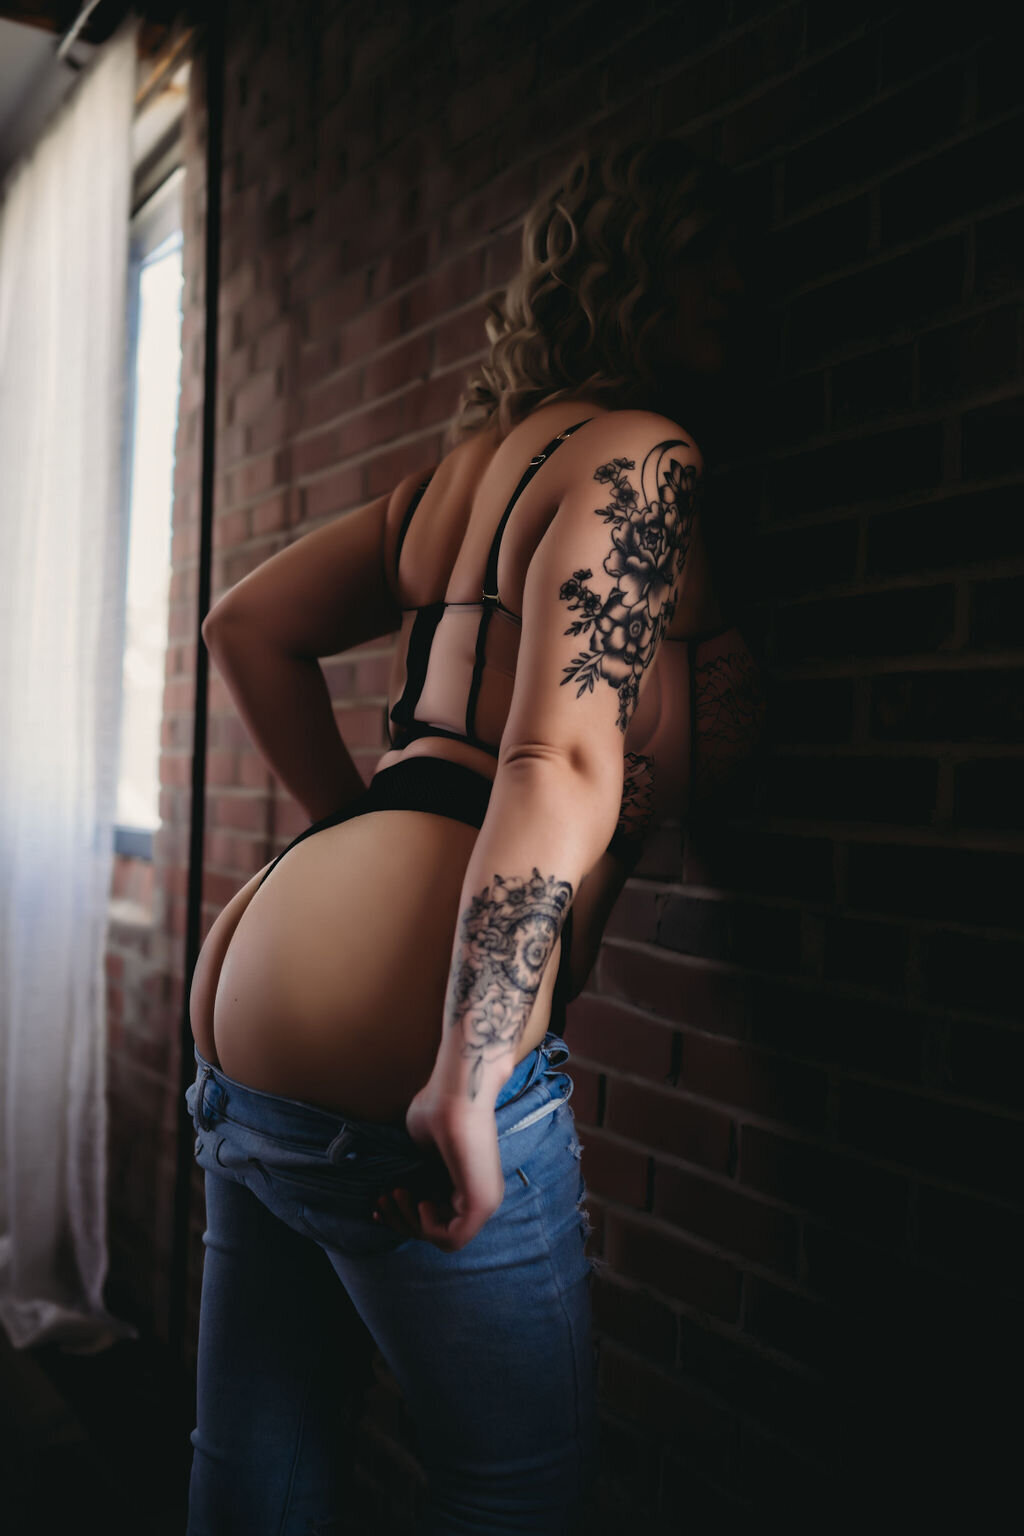 boudoir image of woman leaning against brick wall in jeans pulling them down and showing butt